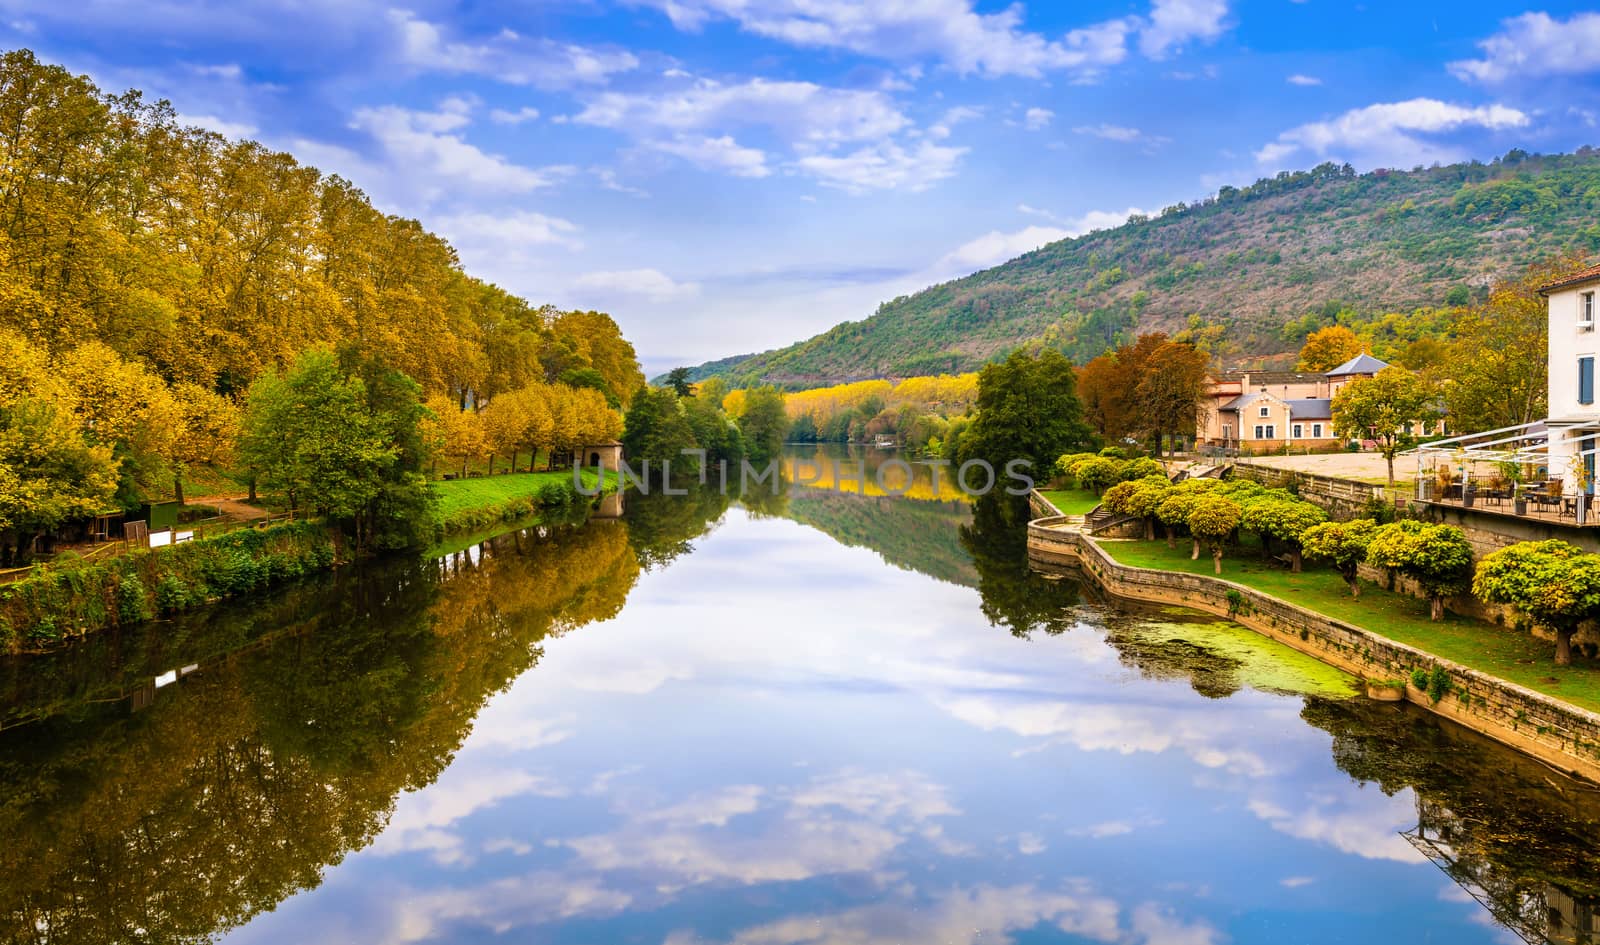 l'Aveyron in Saint-Antonin-Noble-Val, Occitanie, France by Frederic